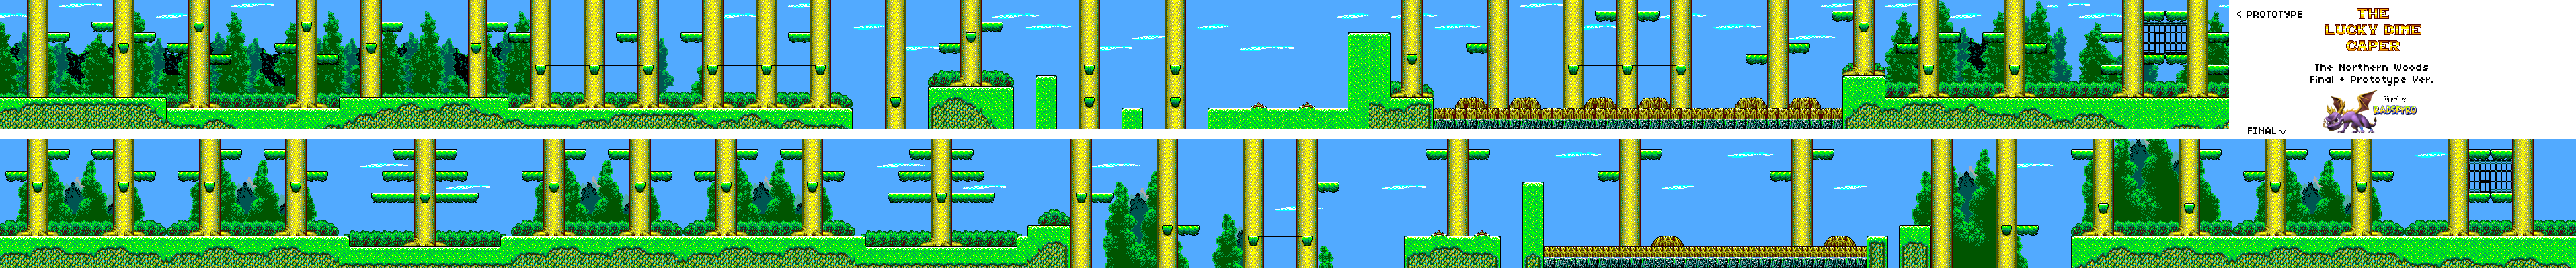 Lucky Dime Caper Starring Donald Duck - Stage 1: The Northern Woods (Final & Prototype)